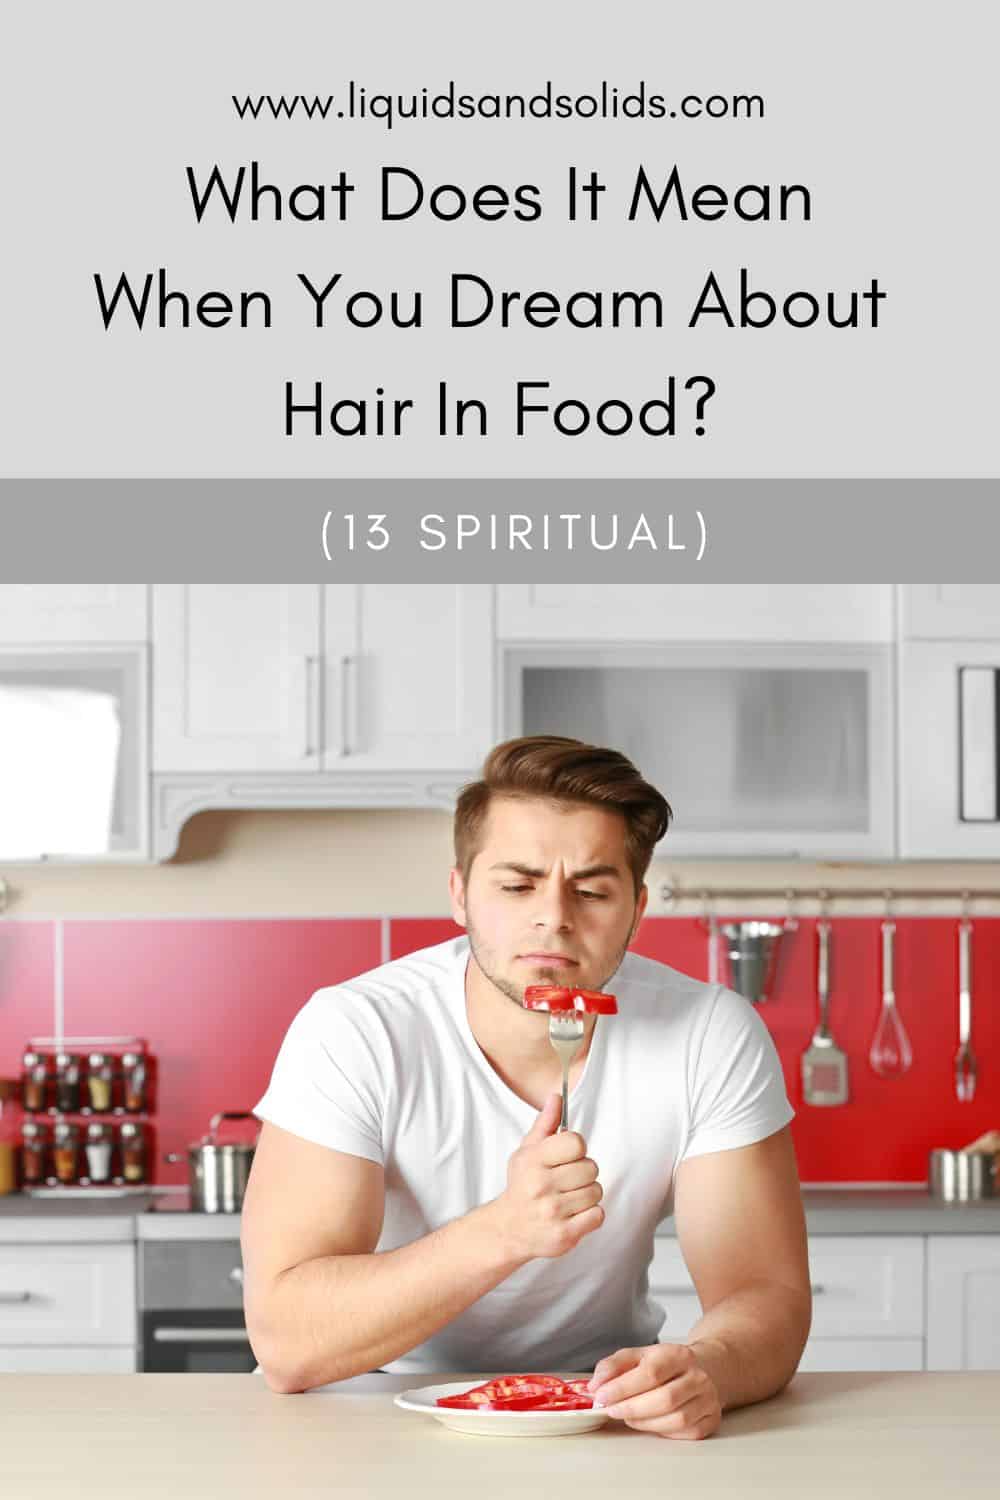 Dream About Hair In Food? (13 Spiritual Meanings)